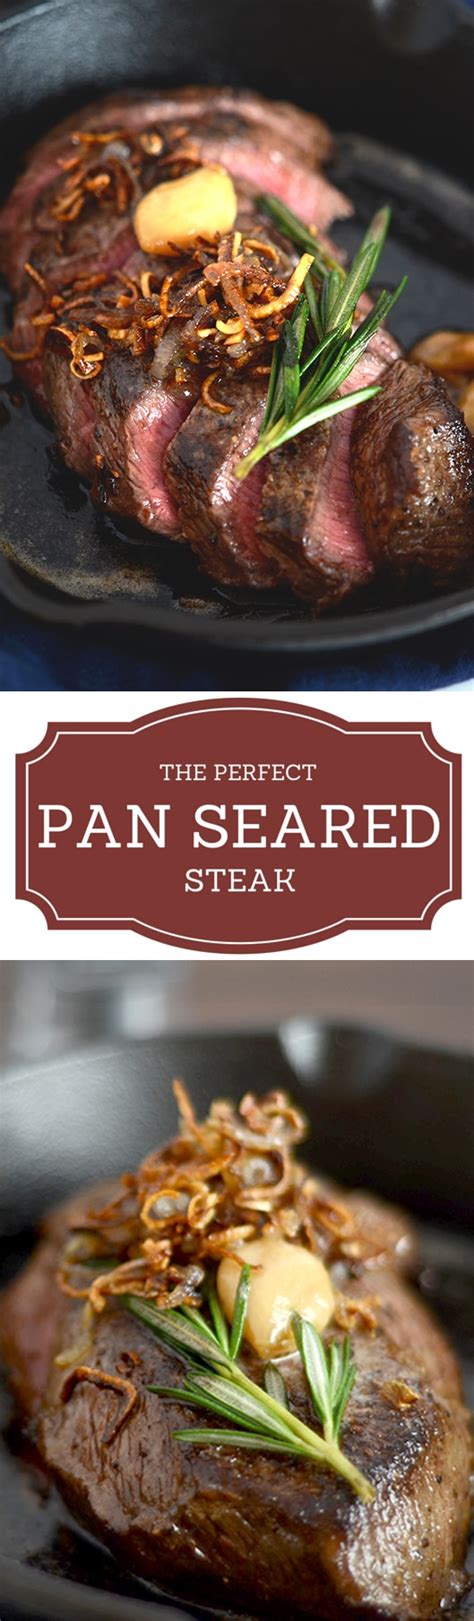 To make this baked steak recipe, you will need: Flat Iron Pan Seared Steak Recipe | I'd Rather Be A Chef